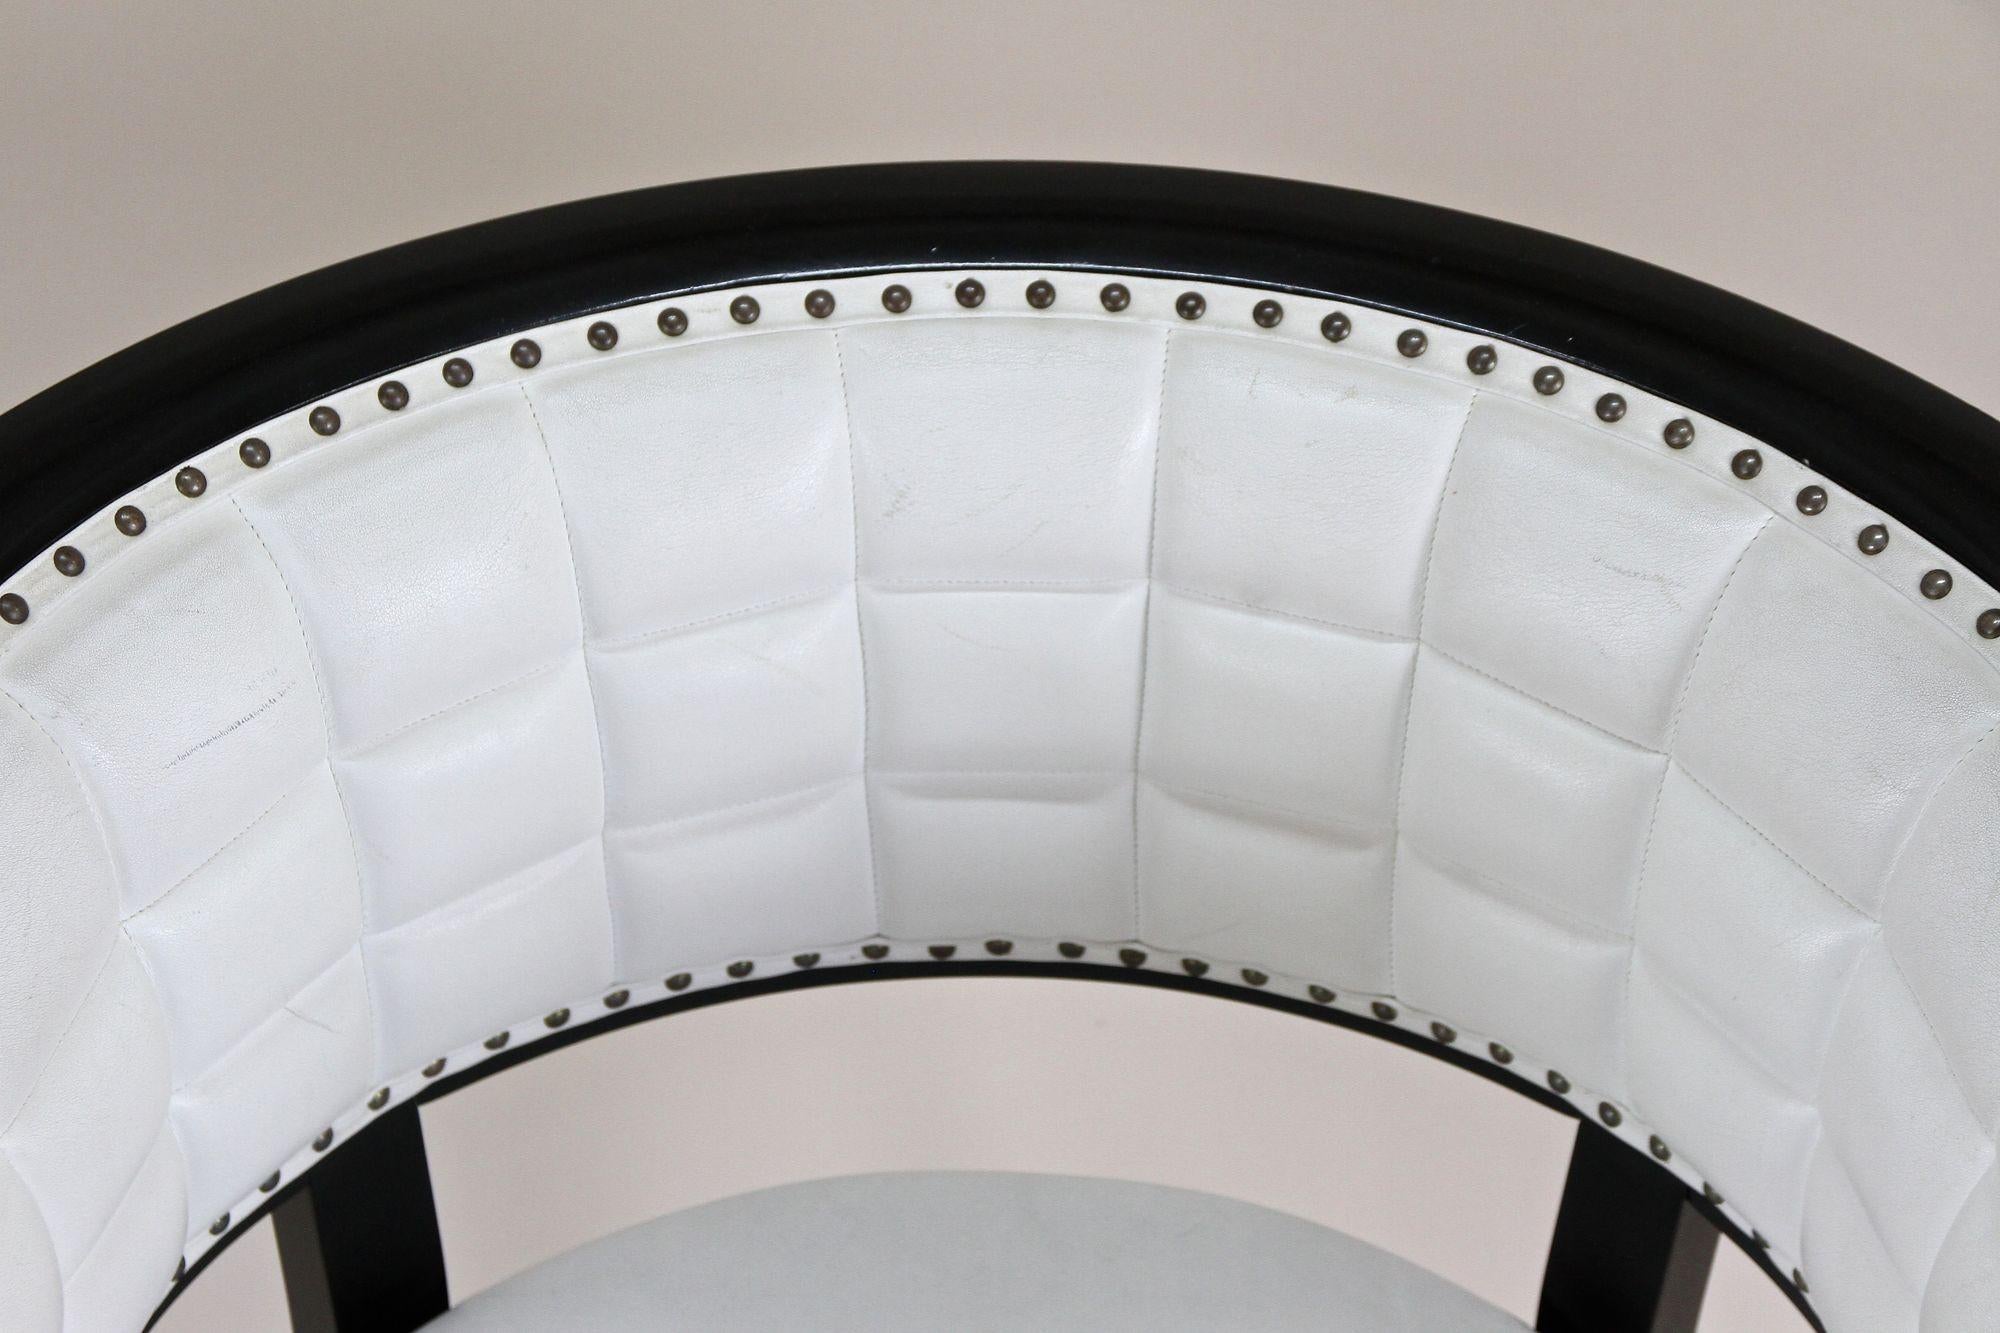 Black Thonet Armchair with White Leather, Design Marcel Kammerer, at circa 1980 For Sale 1